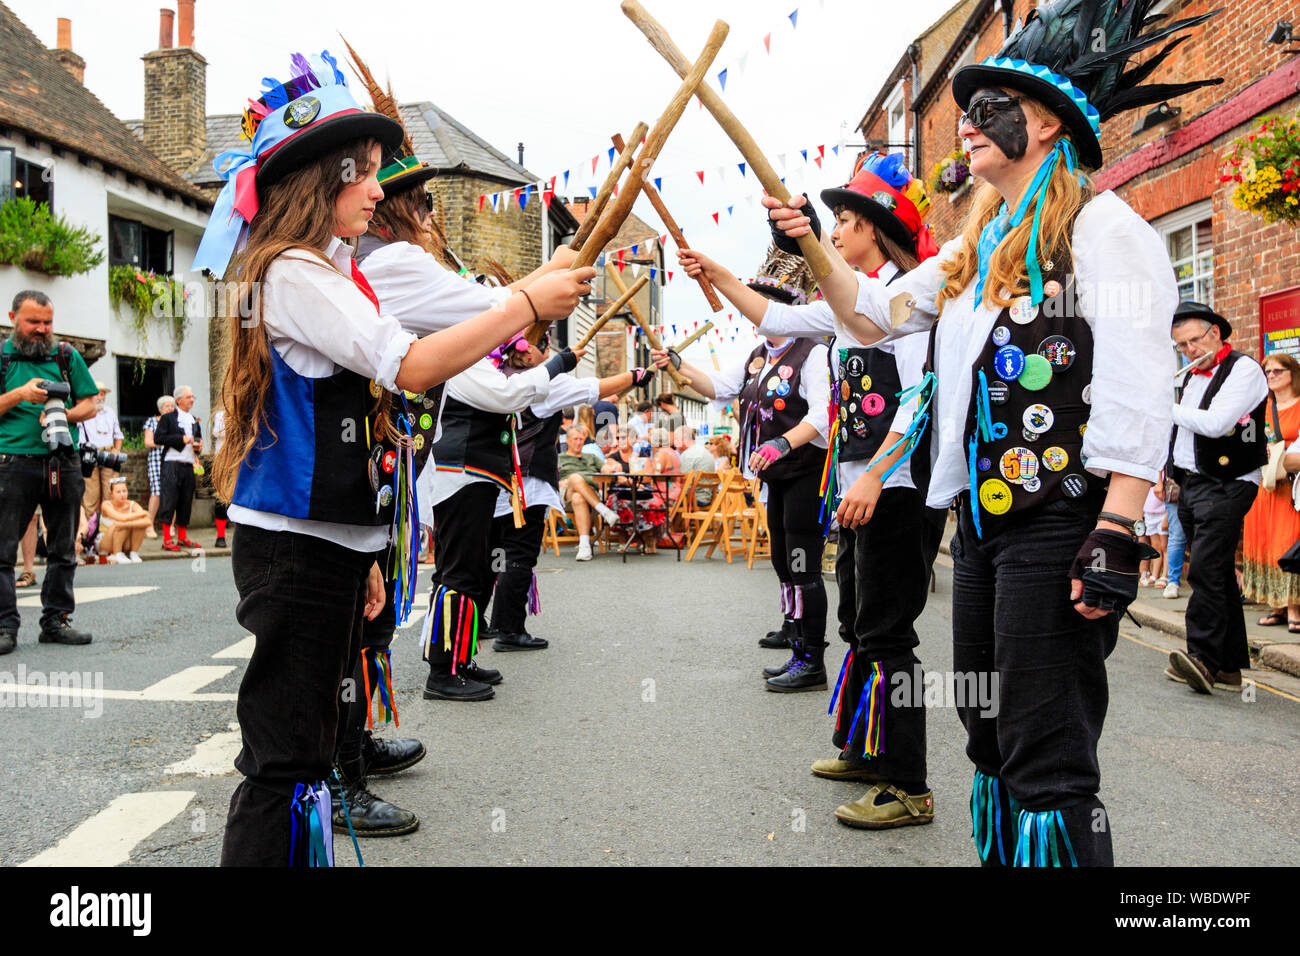 Sandwich folk and Ale Festival event in UK. The Broomdashers women's morris side with blacked faces and carrying wooden staffs, dancing in the street. Stock Photo